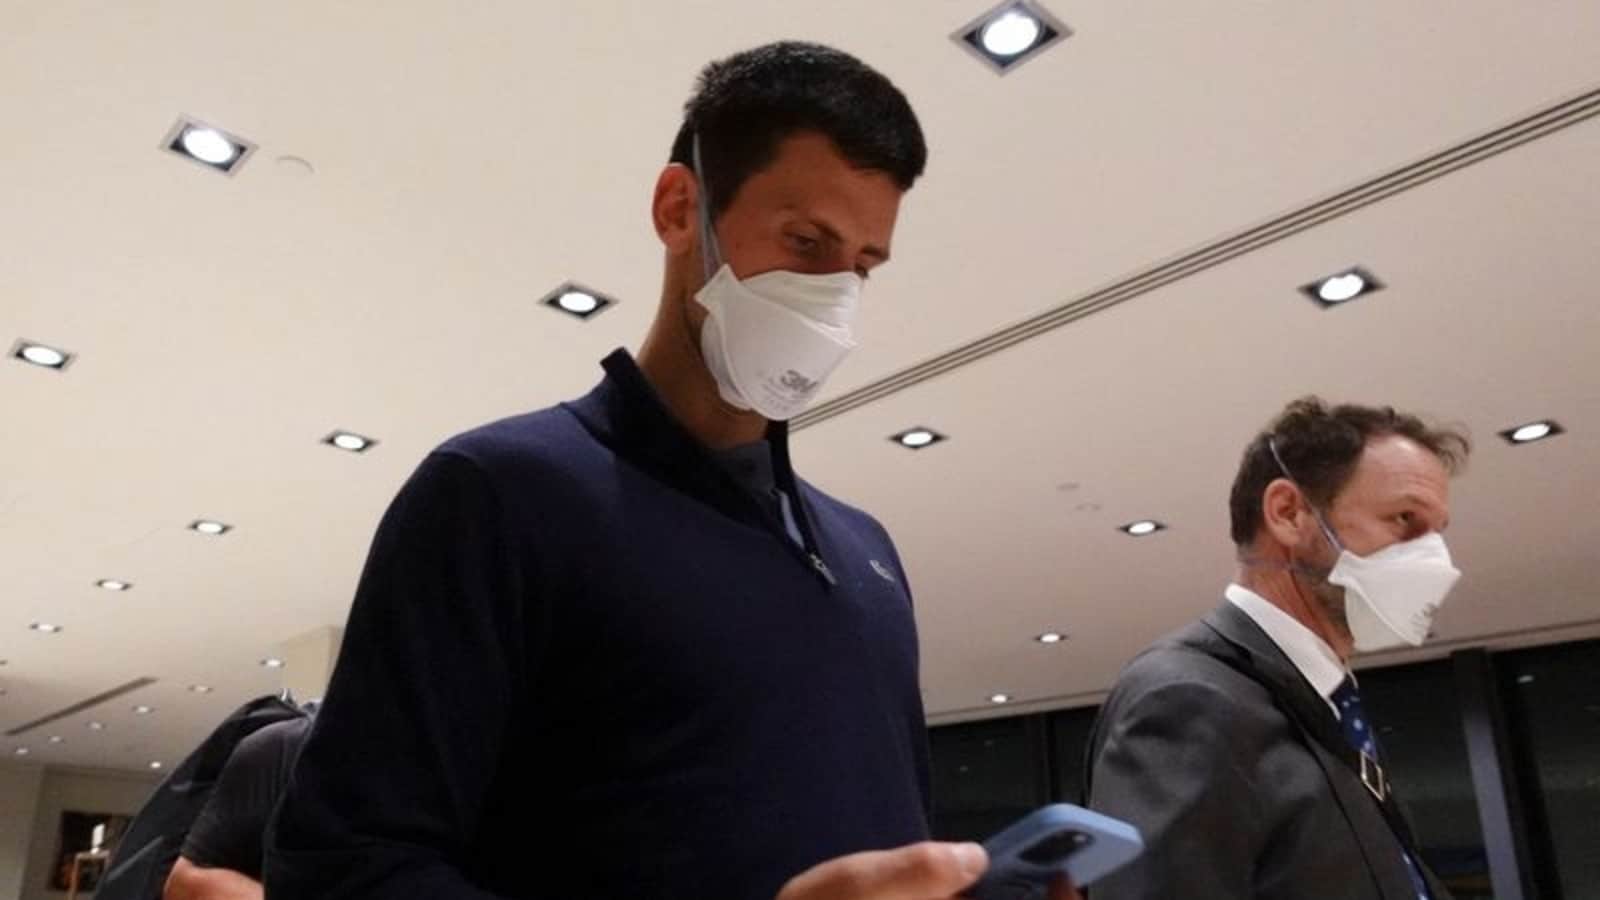 Spain urges Novak Djokovic to set an example and get vaccinated